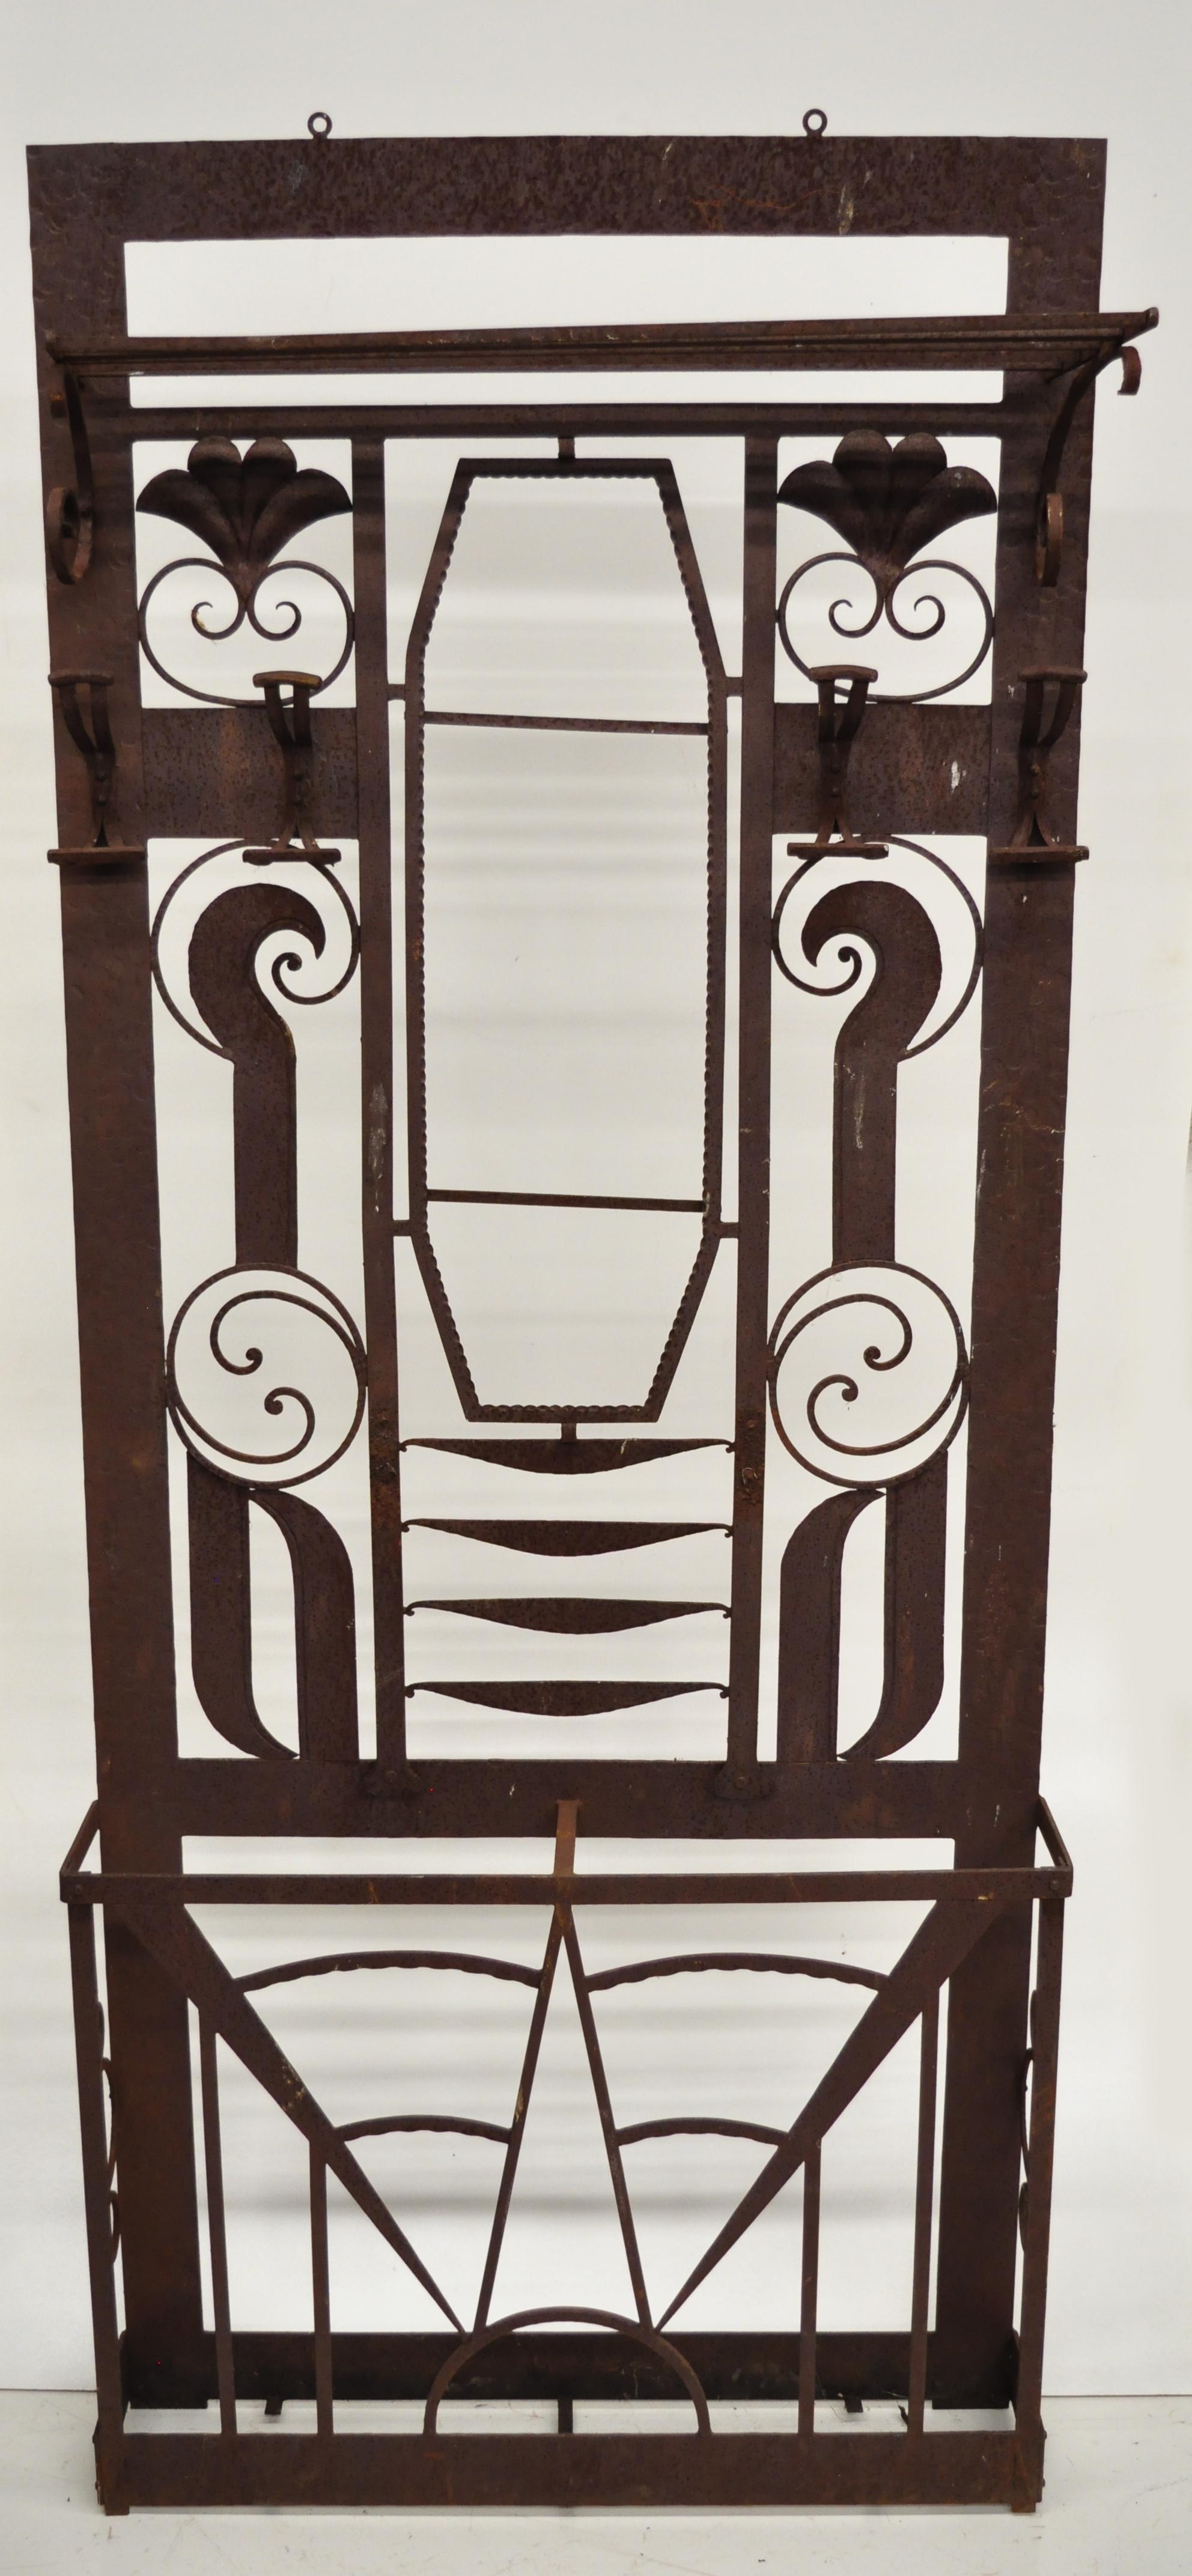 Antique French Art Nouveau / Art Deco wrought iron hall tree in the Edgar Brandt style. Item features a top shelf, fancy scroll work, coat and hat hooks, should mount to wall, currently unfinished, 85 lbs, can take a mirror but does not include